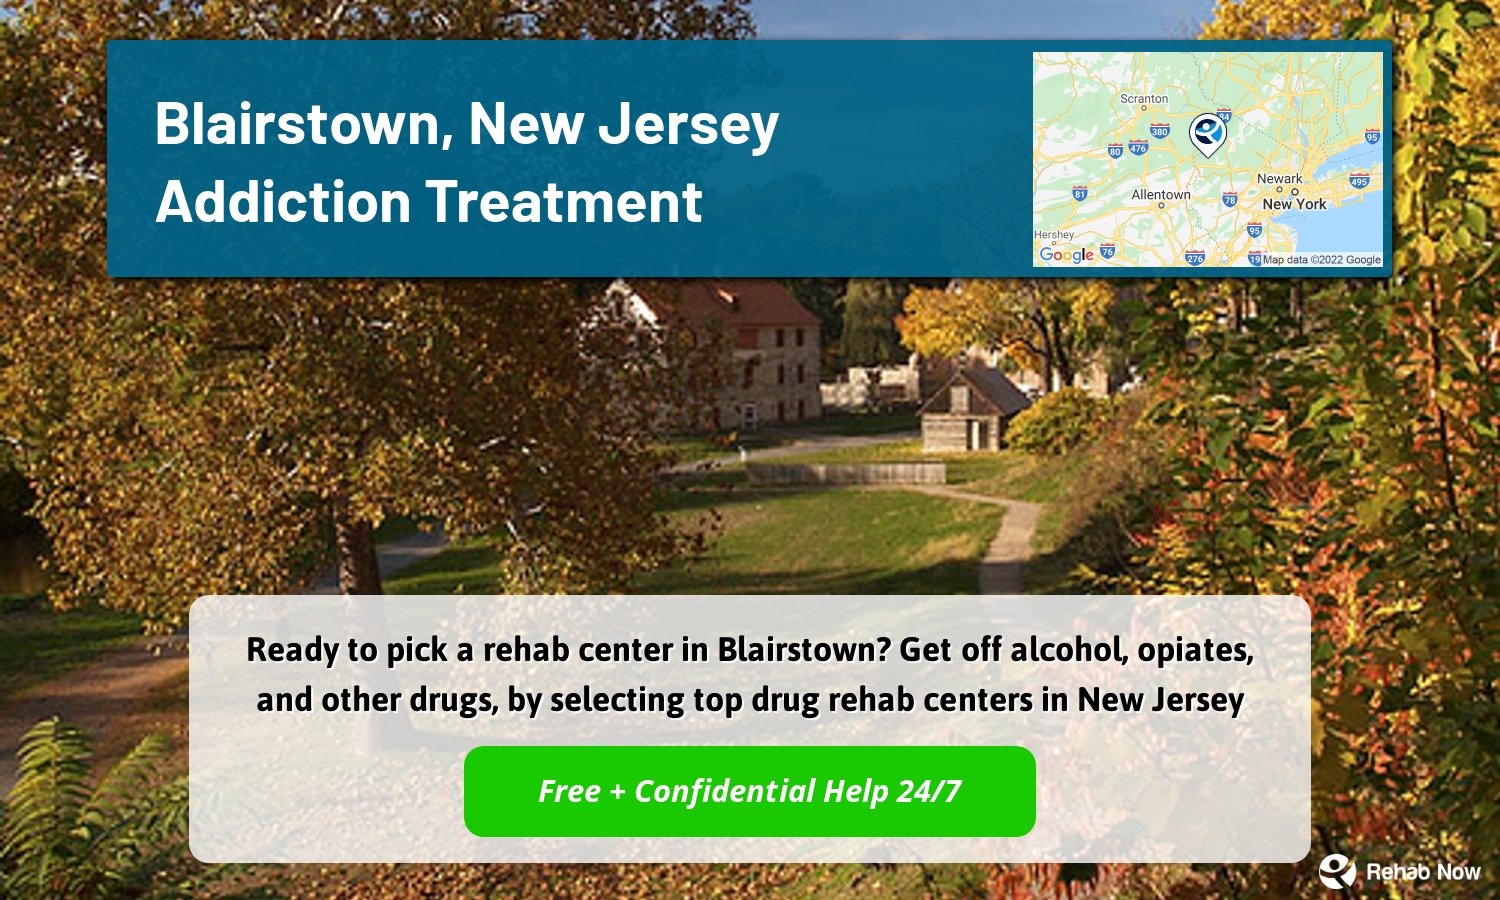 Ready to pick a rehab center in Blairstown? Get off alcohol, opiates, and other drugs, by selecting top drug rehab centers in New Jersey